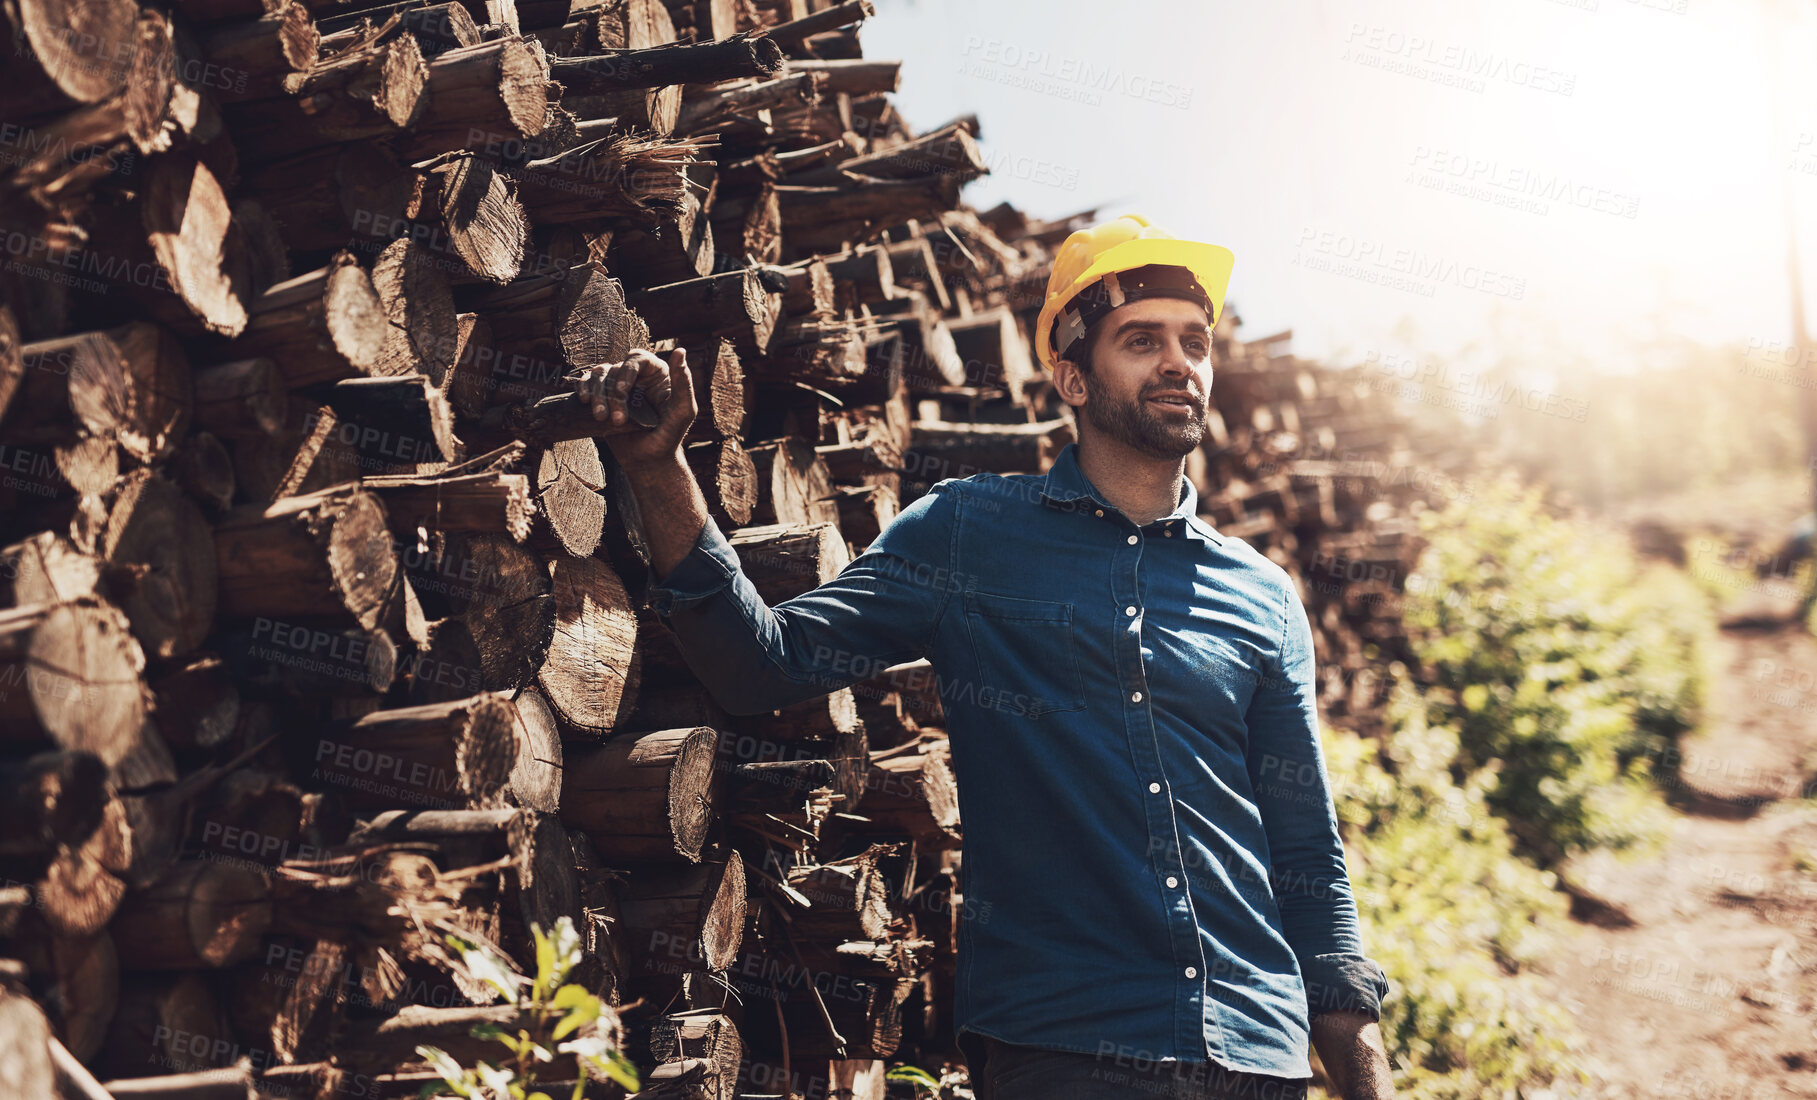 Buy stock photo Cropped shot of a lumberjack standing in front of a pile of wood